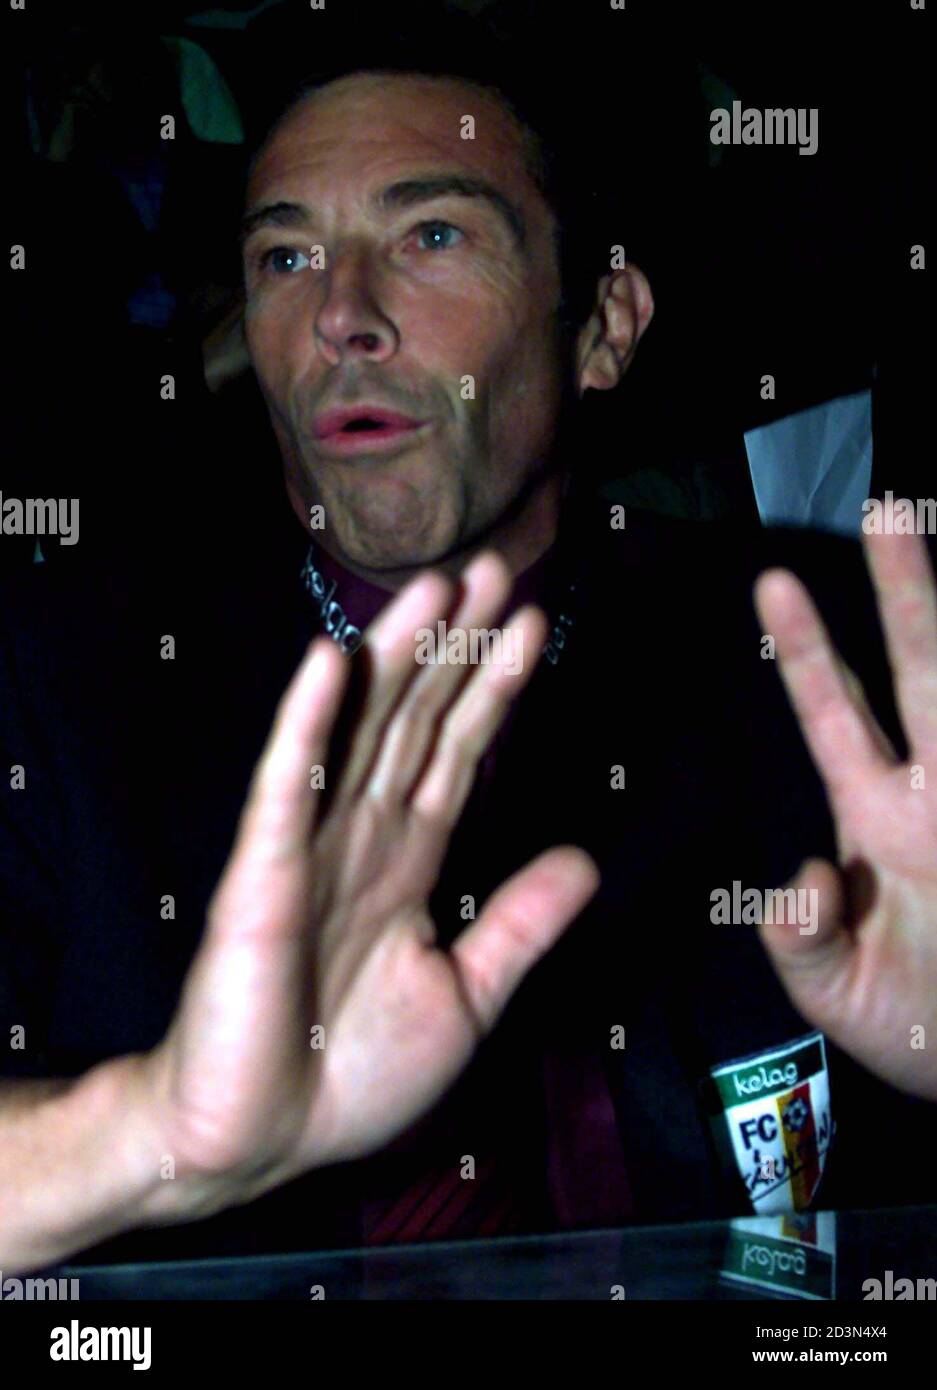 Joerg Haider president of the Austrian soccer team Karnten reacts during the UEFA Cup match Paok Salonica versus Karnten September 27, 2001. Paok won the match 4-0. REUTERS/Grigoris Siamidis  GS Stock Photo